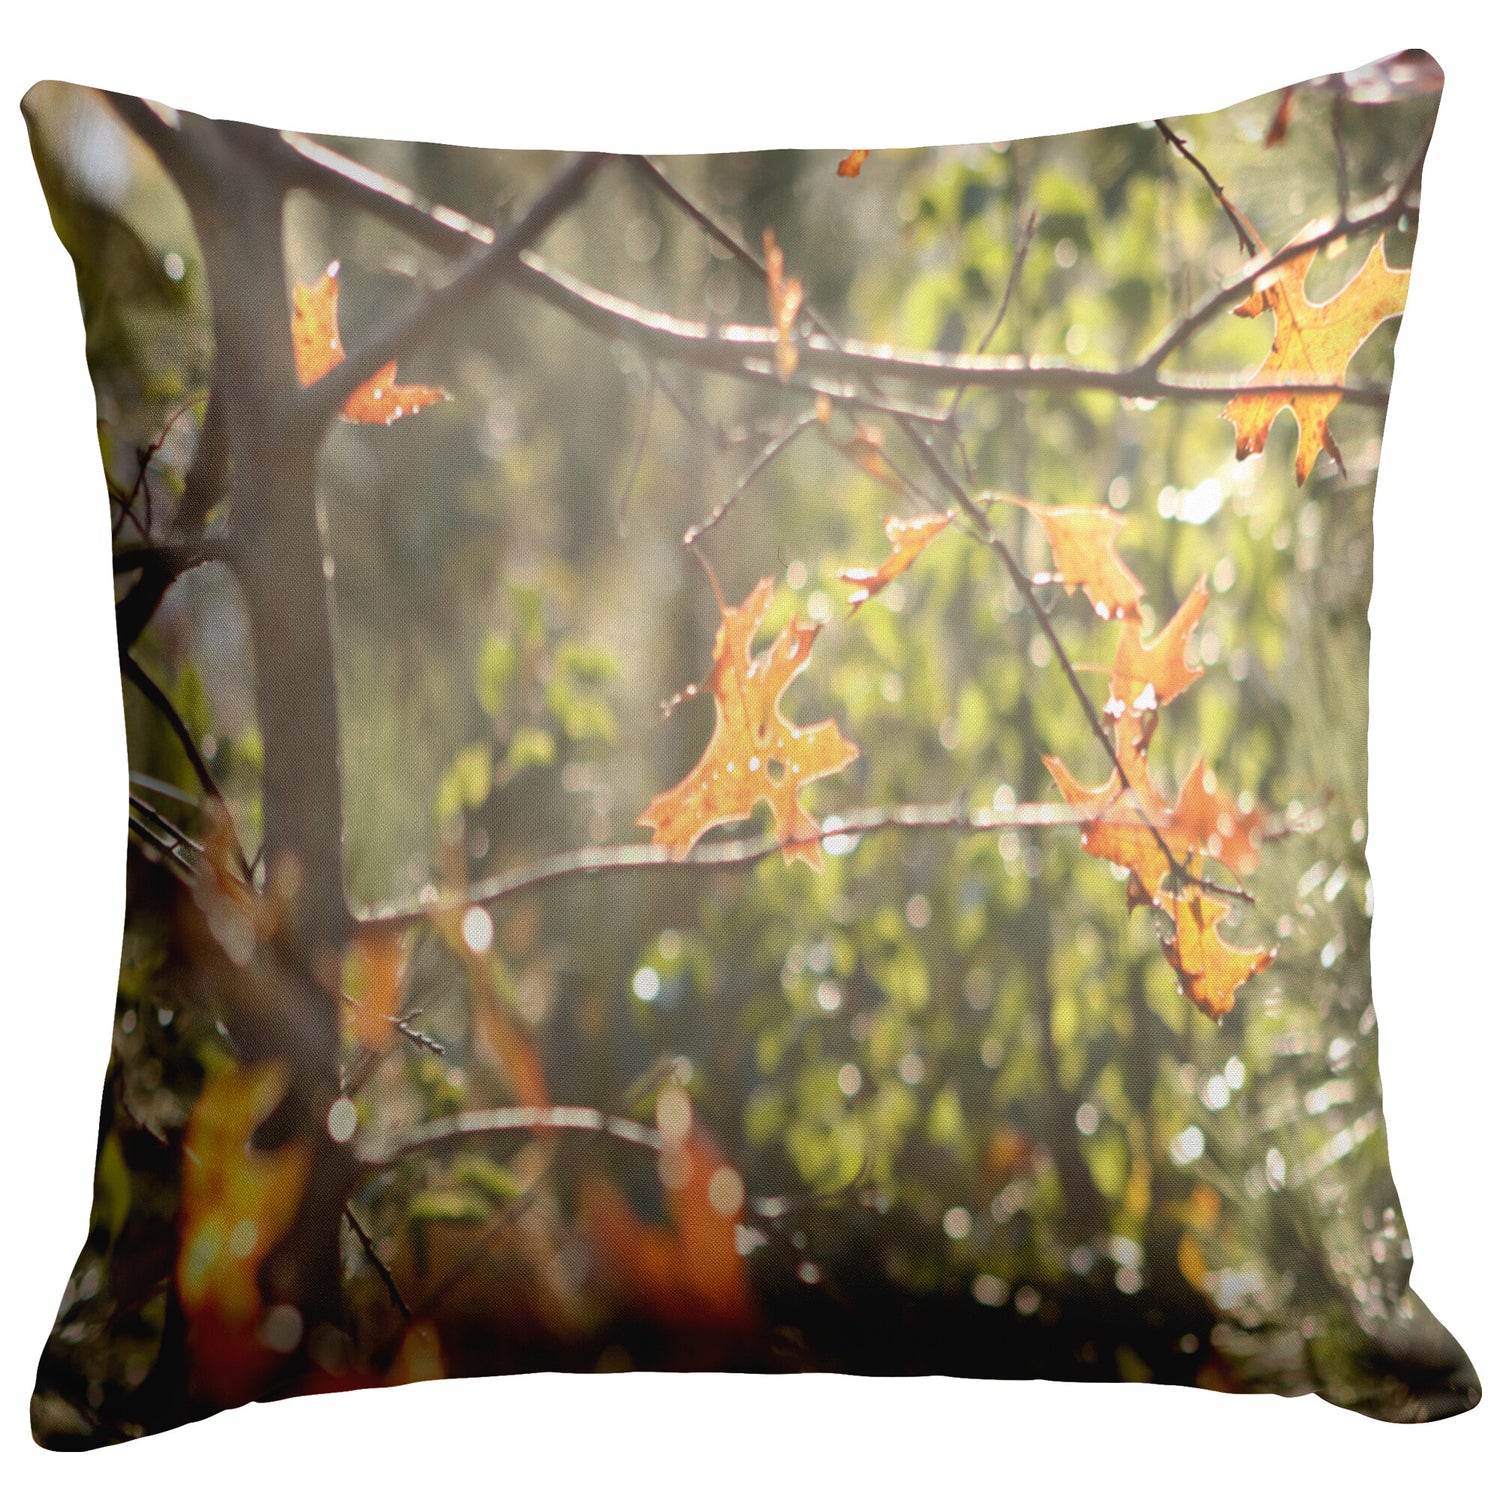 I Love Fall Y'all - Pillow Lettering - Signs and Seasons Gifts